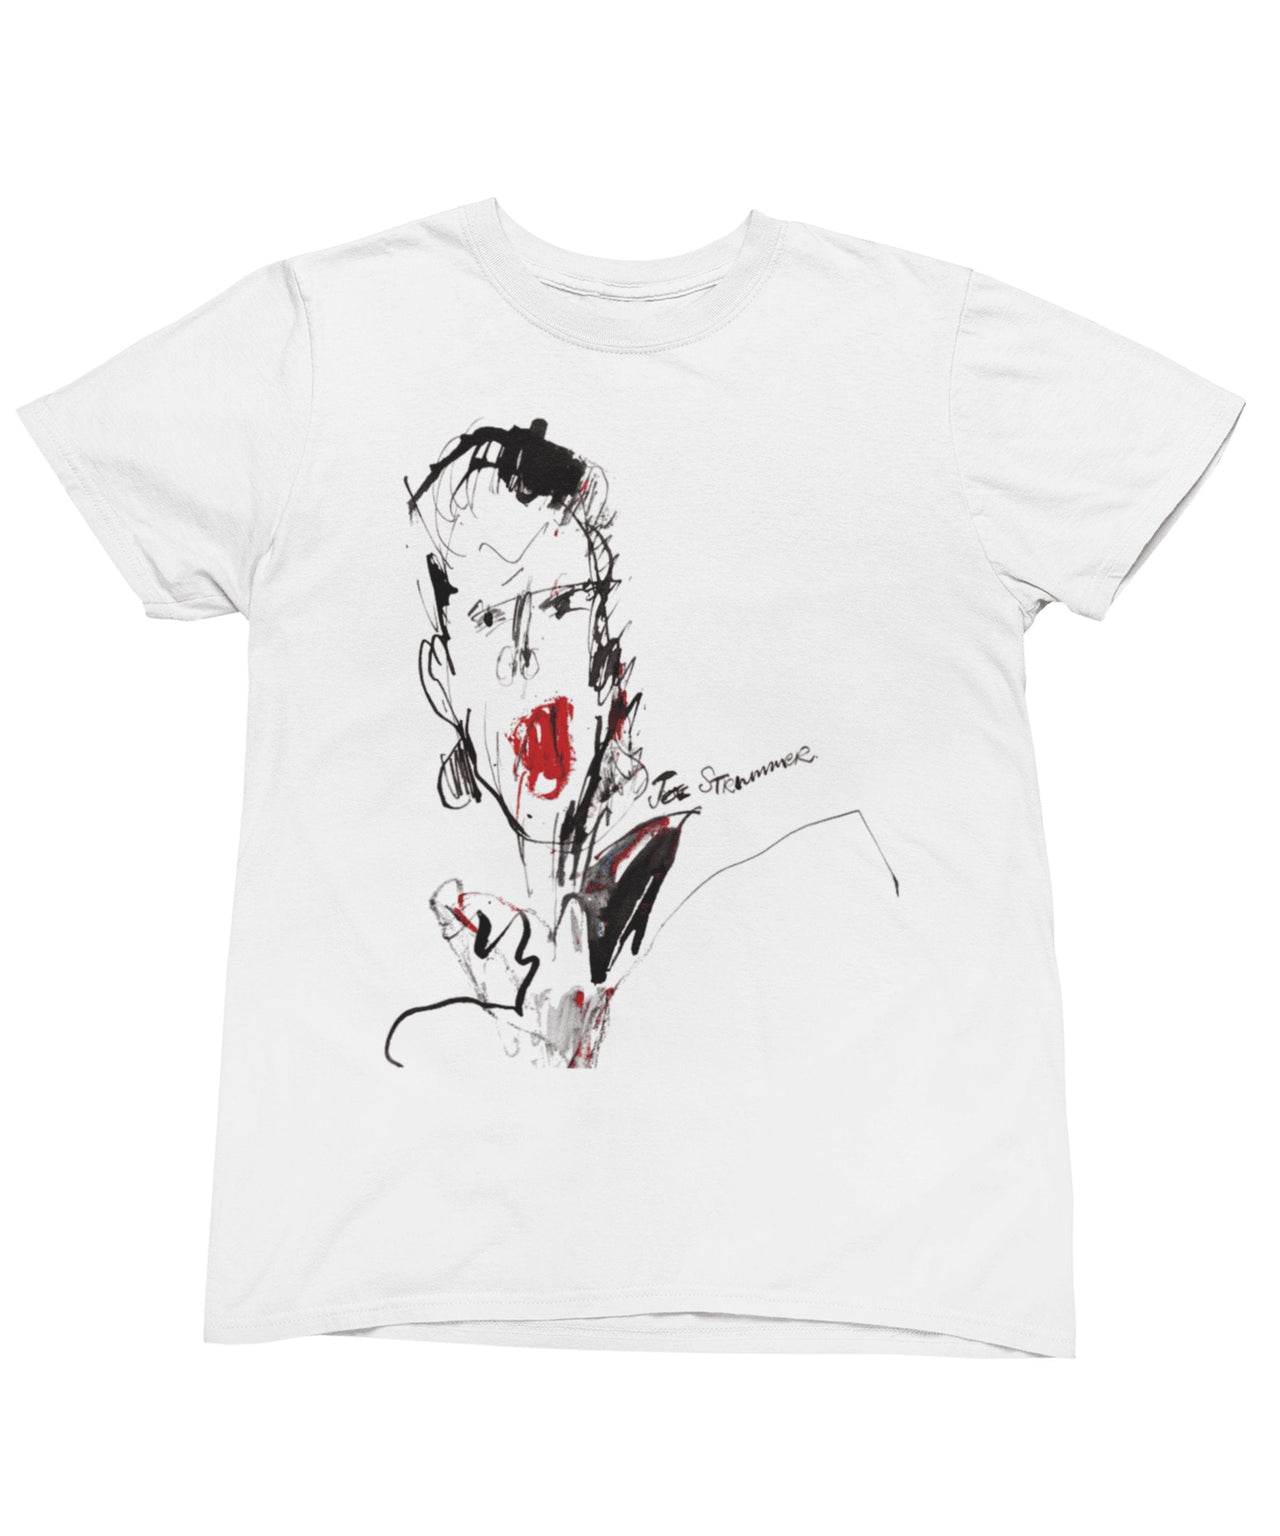 The Clash Joe Strummer Illustration By Ray Lowry Graphic T-Shirt For Men 8Ball